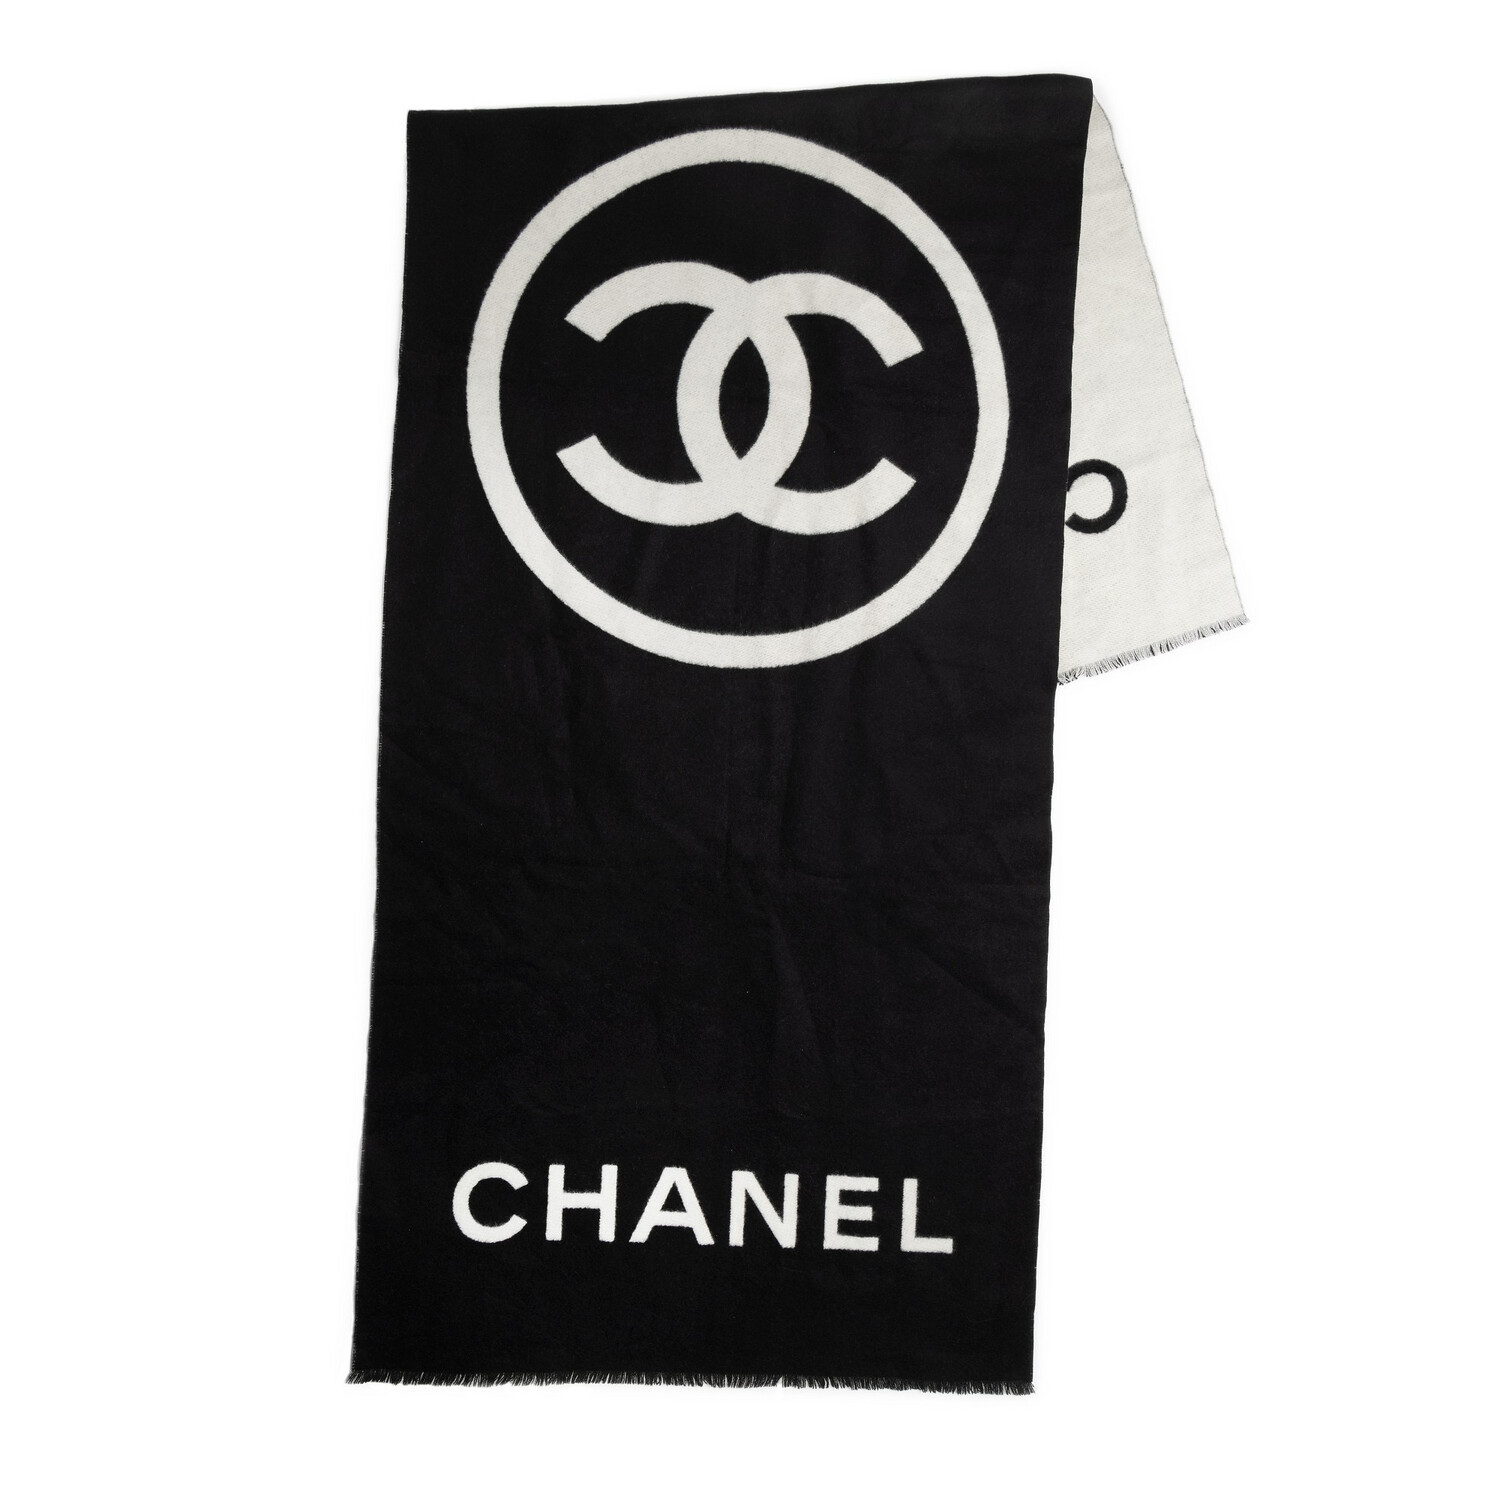 Chanel Cashmere Scarf Stole, Black and White Cashmere, Preowned WA001